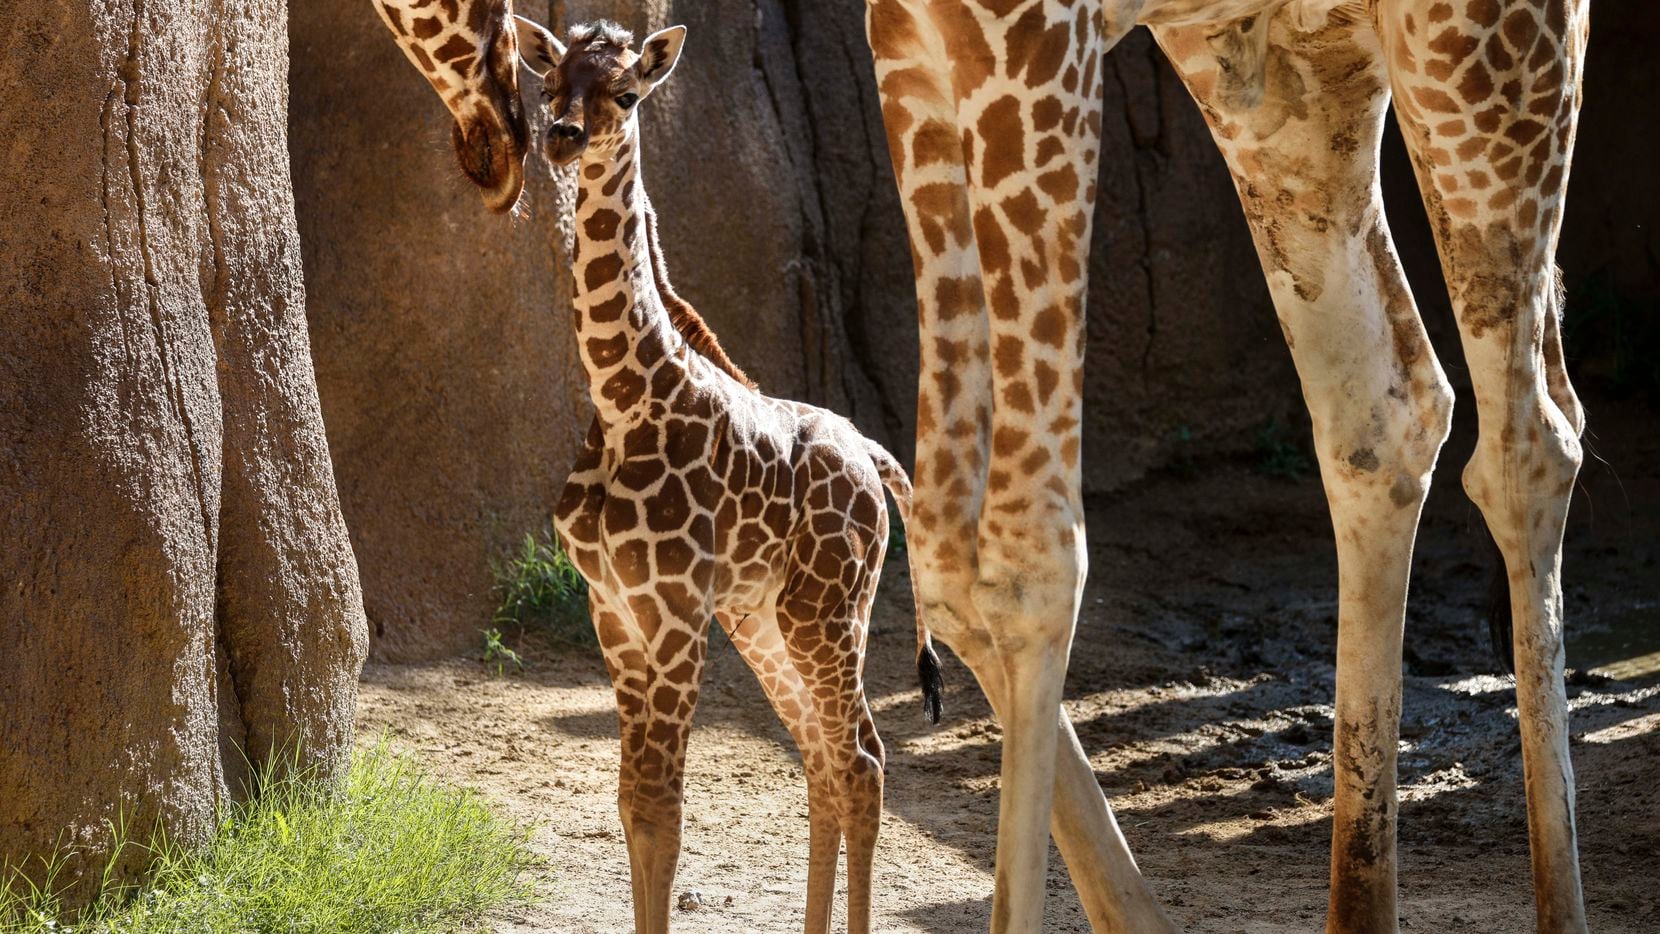 Marekani, born on the Fourth of July, made her public debut four days later at the Dallas Zoo.